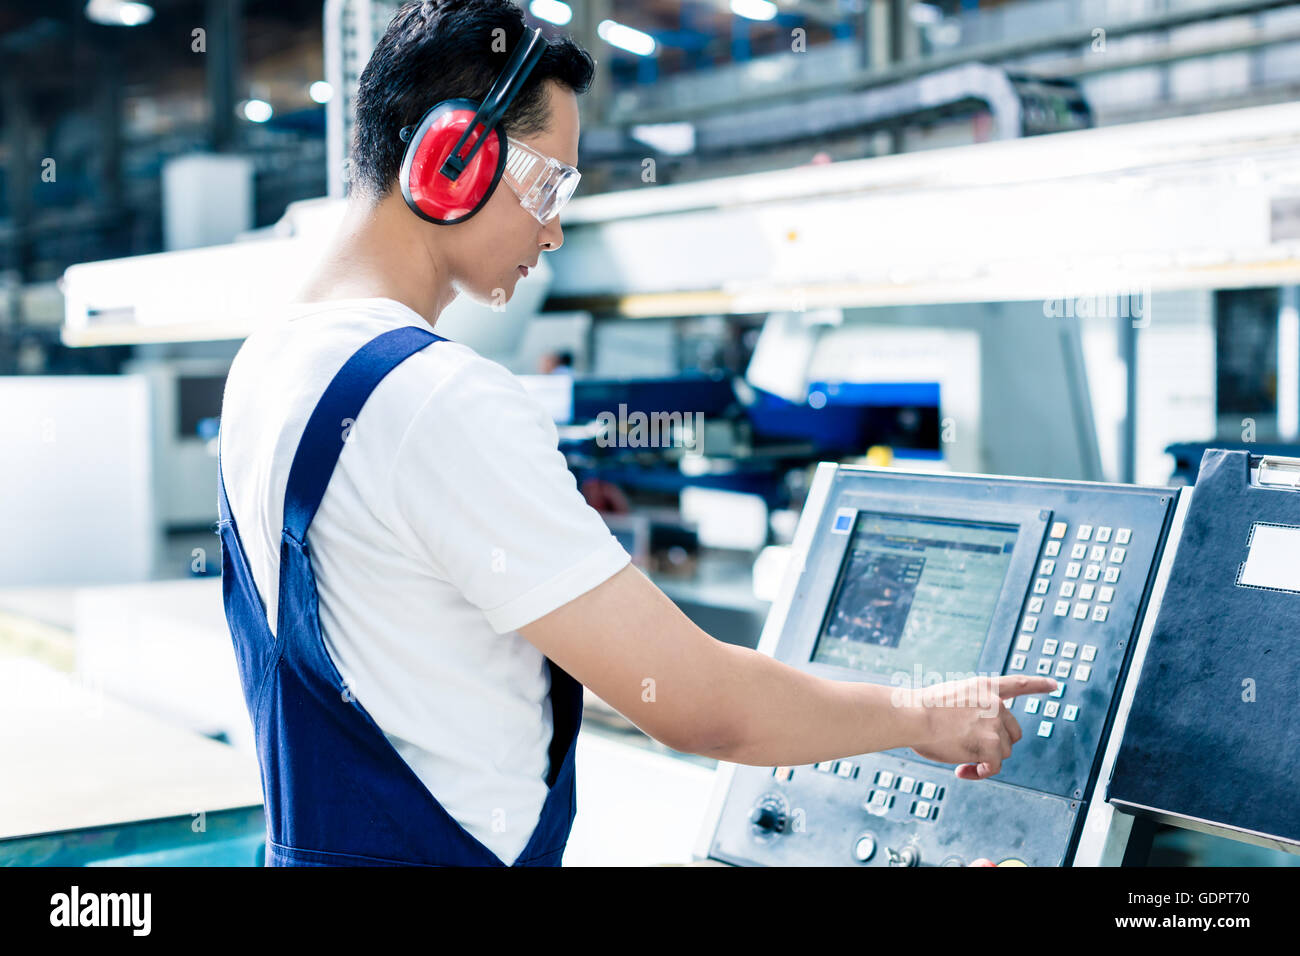 Worker entering data in CNC machine at factory floor to get the production going Stock Photo